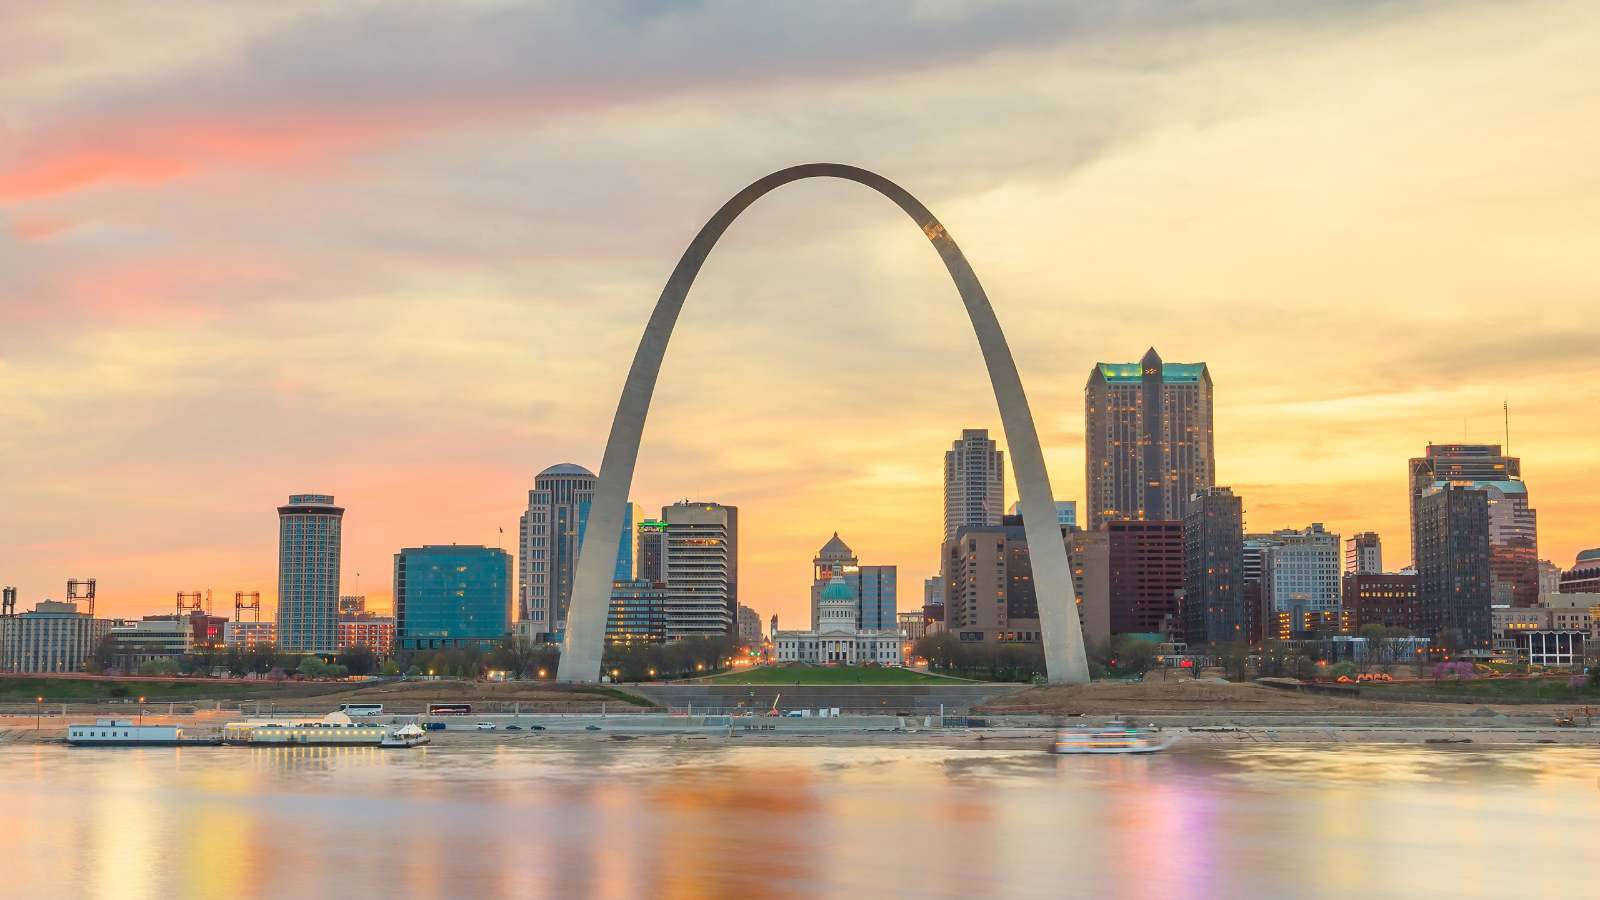 <p>The Gateway Arch is a monument that stands 630 feet tall and is the tallest arch in the world. It’s a great place to visit and offers visitors a beautiful view of the city from the top.</p>